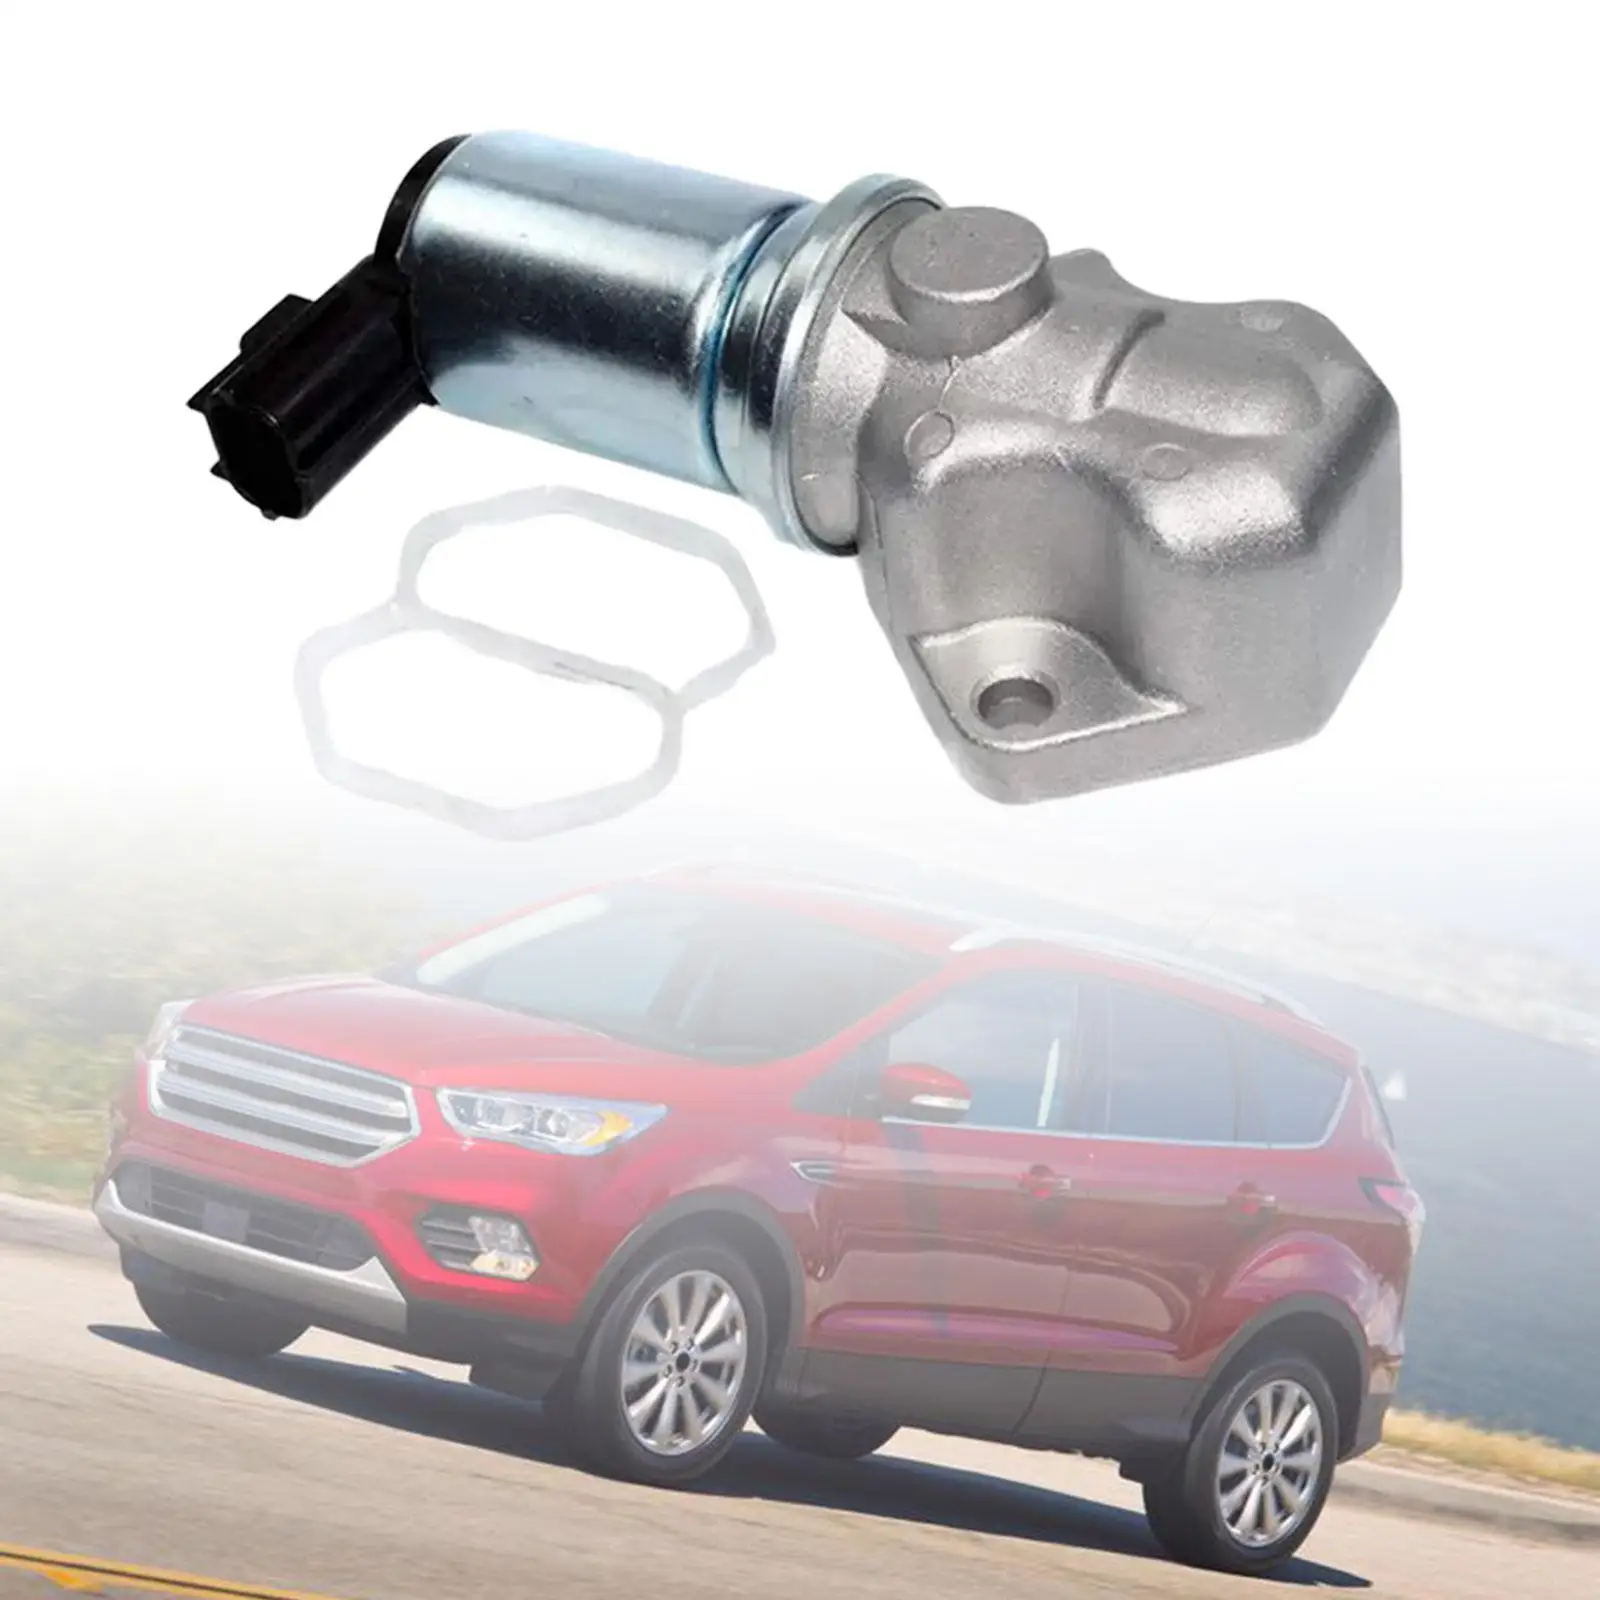 Idle Air Control Valve Idle Motor Replacement Premium Auto Part 1L8Z9F715AA 1L8E9F715AA Aesp109-38A for Mazda MPV 3.0L